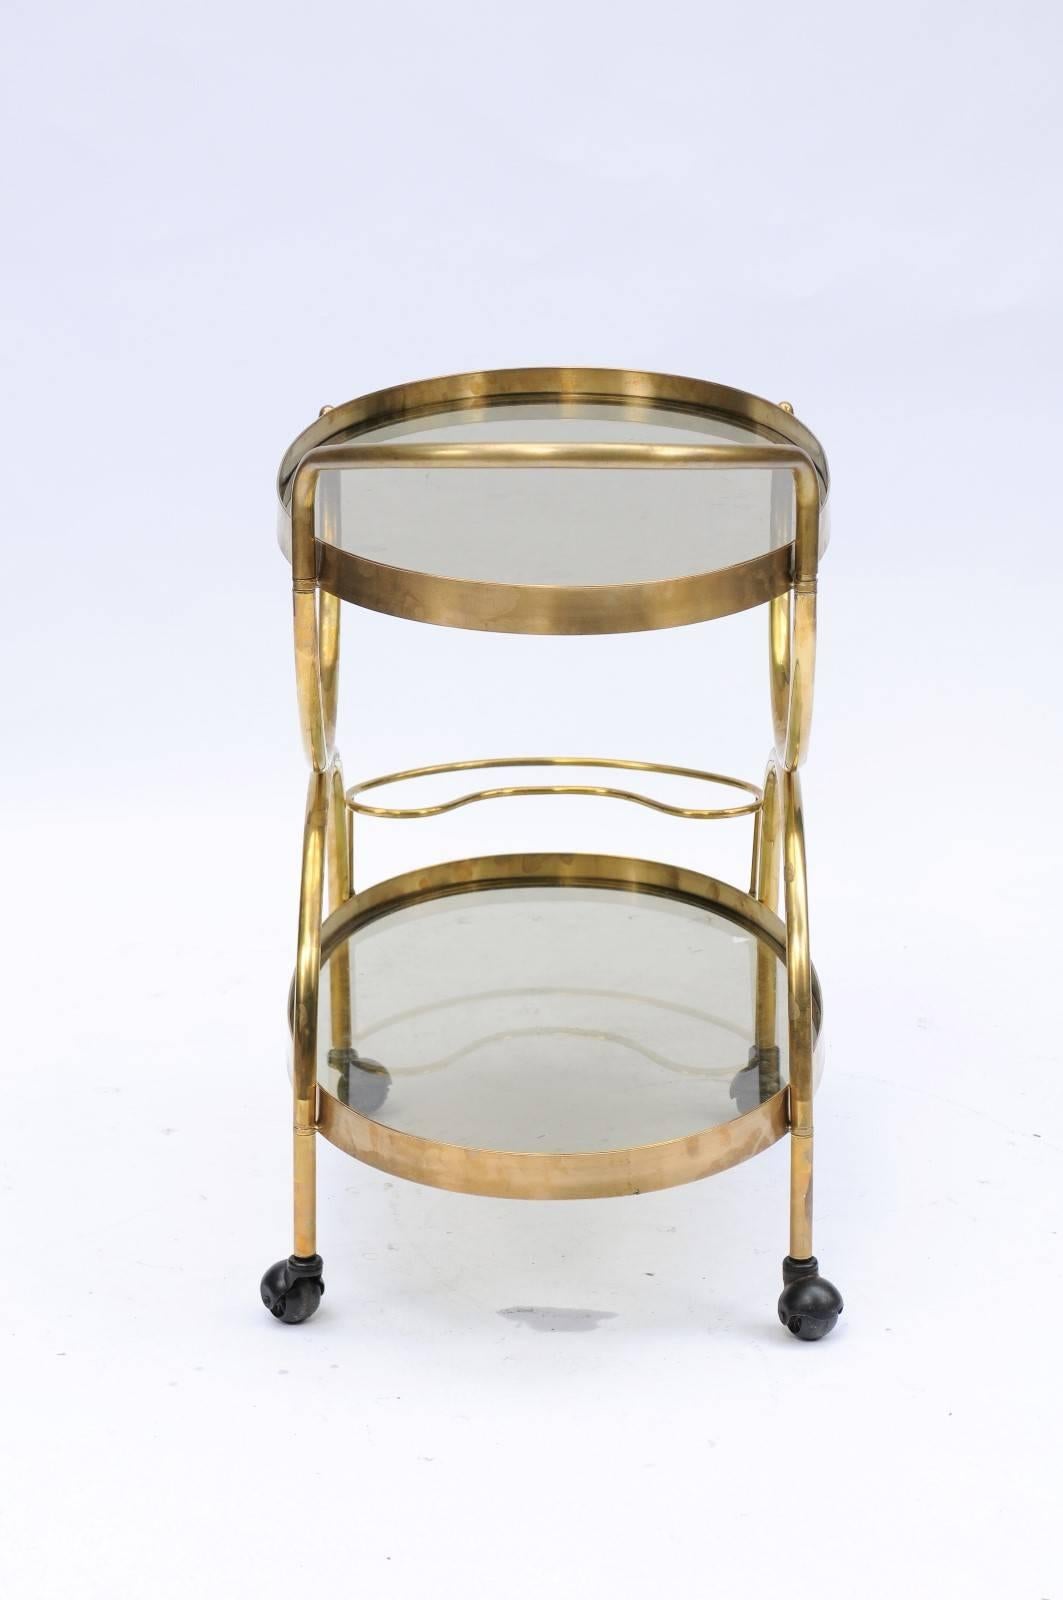 Italian Florentine, 1950s, Two-Tiered Oval Brass and Glass Bar Cart with Curvy Lines